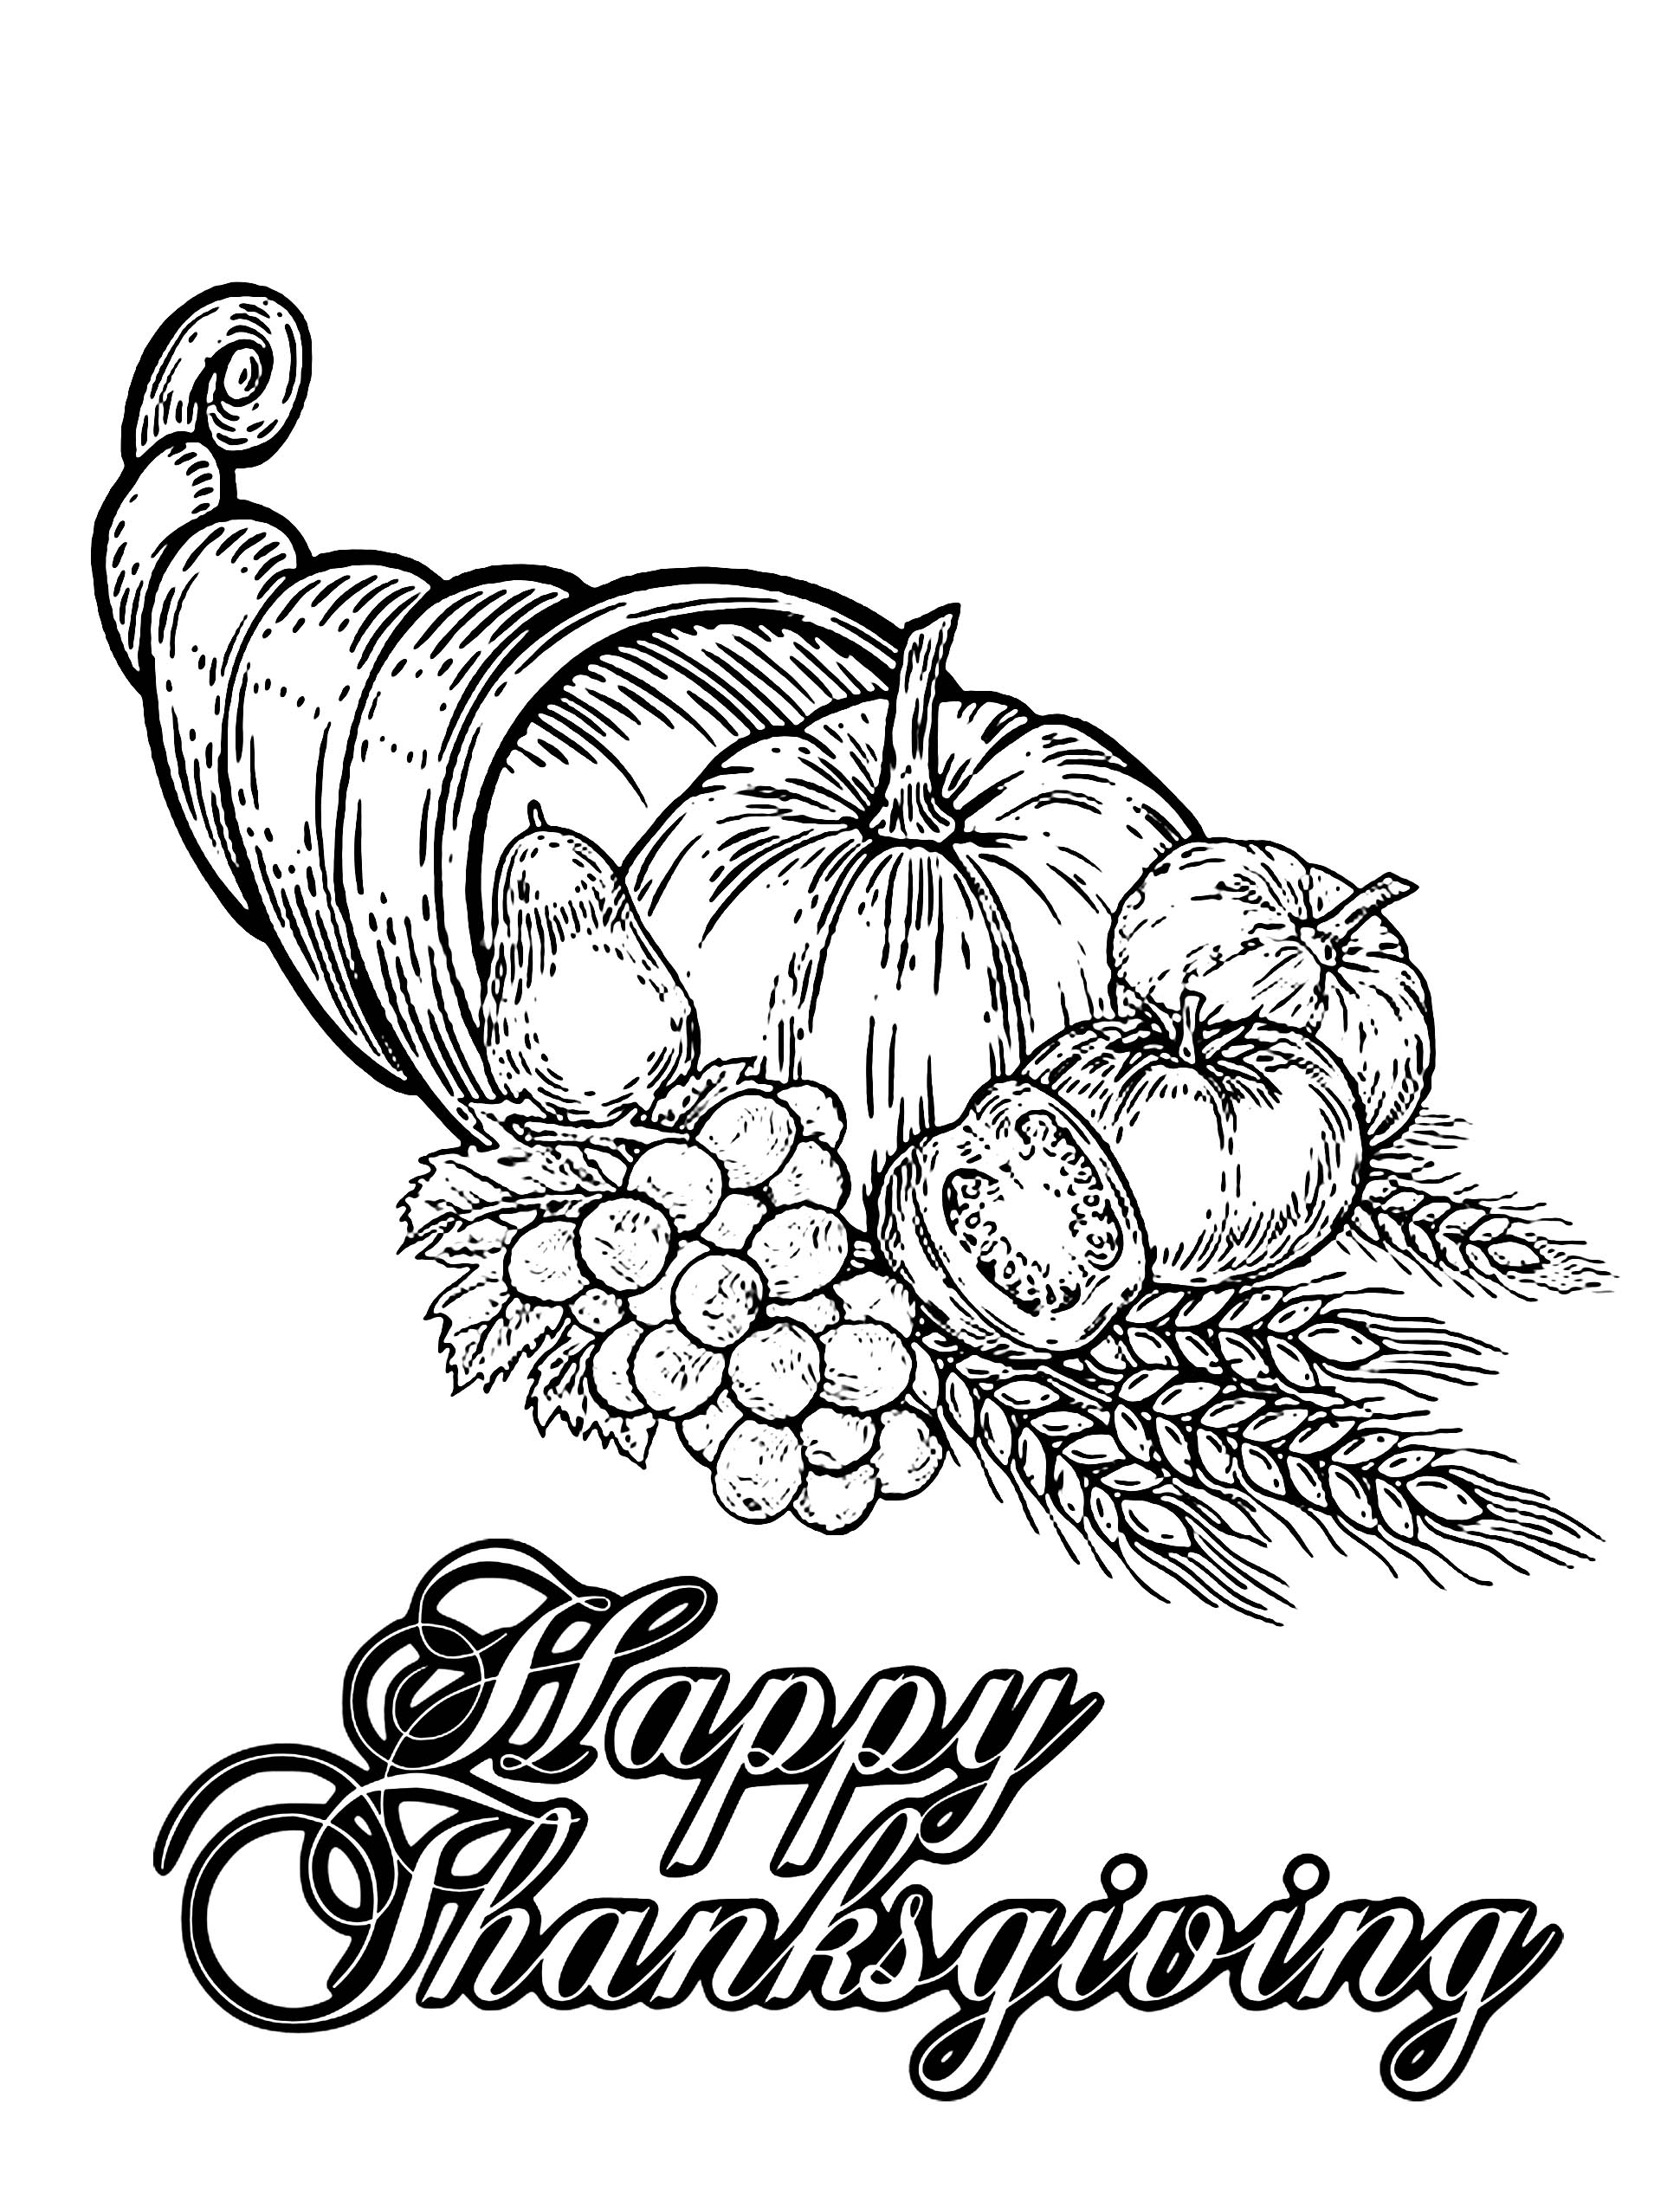 Happy Thanksgiving Coloring page